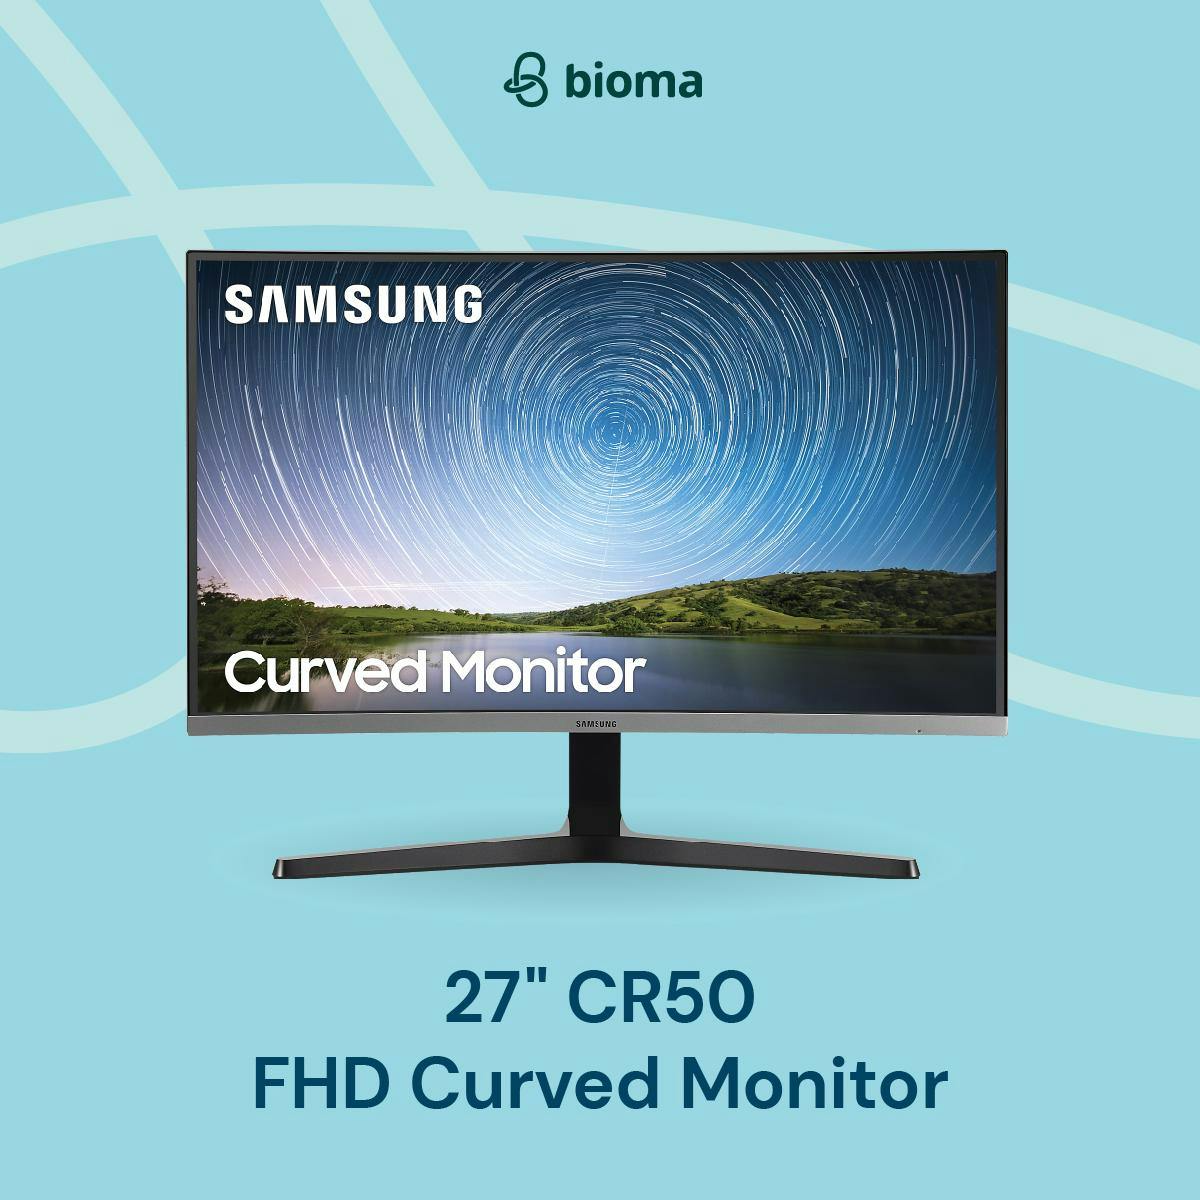 27" CR50 FHD Curved Monitor